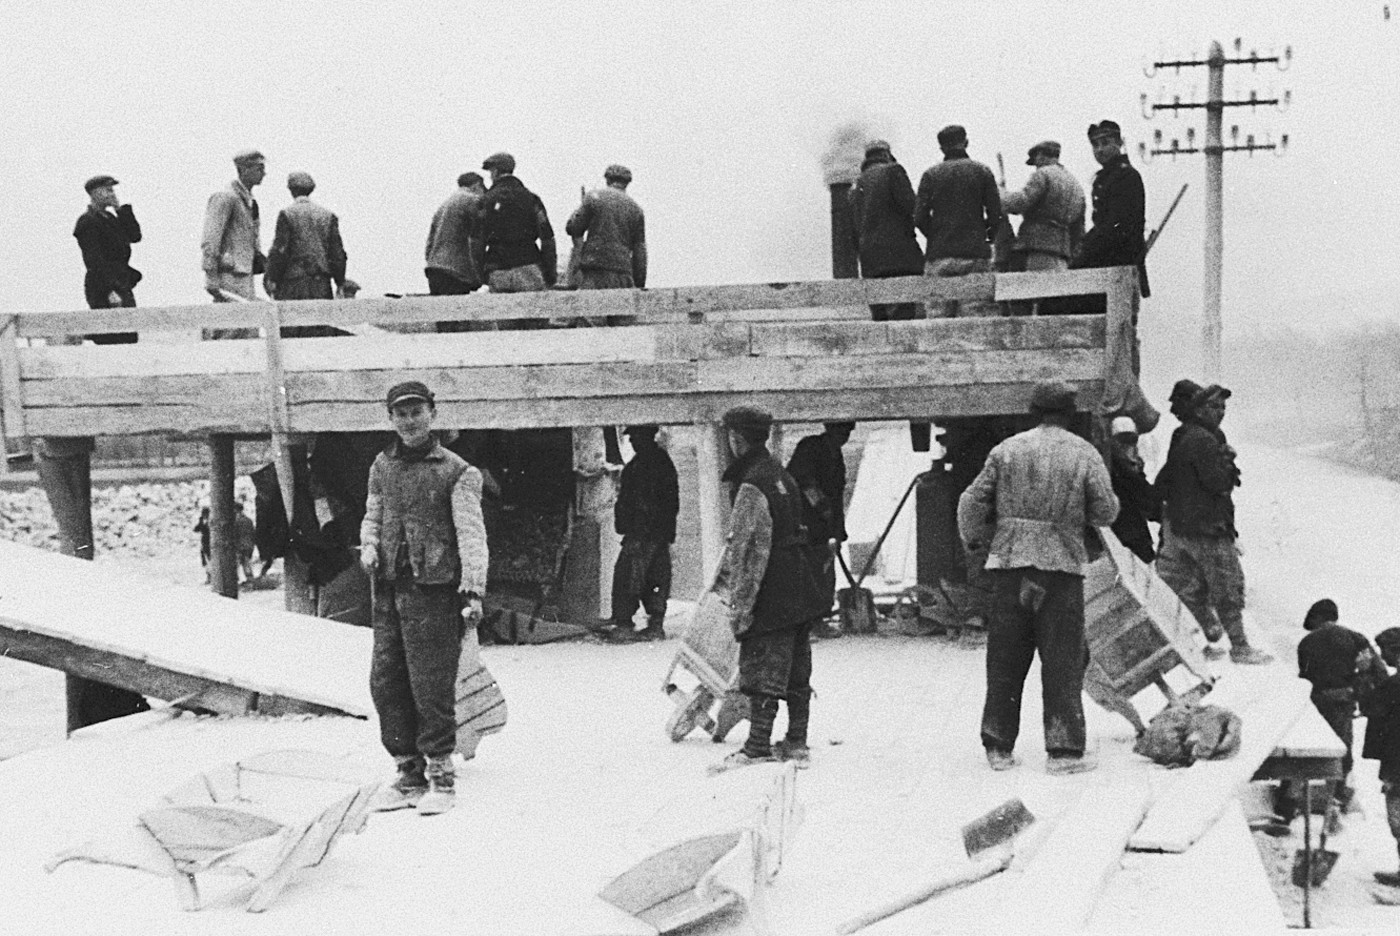 Jewish prisoners from the Stupki labor camp at forced labor in a quarry. 

Stupki was one of several labor camps established along the route of the Rollbahn Sued in Galicia.

Pictured in the foreground, facing the camera, is Moshe Kohn.